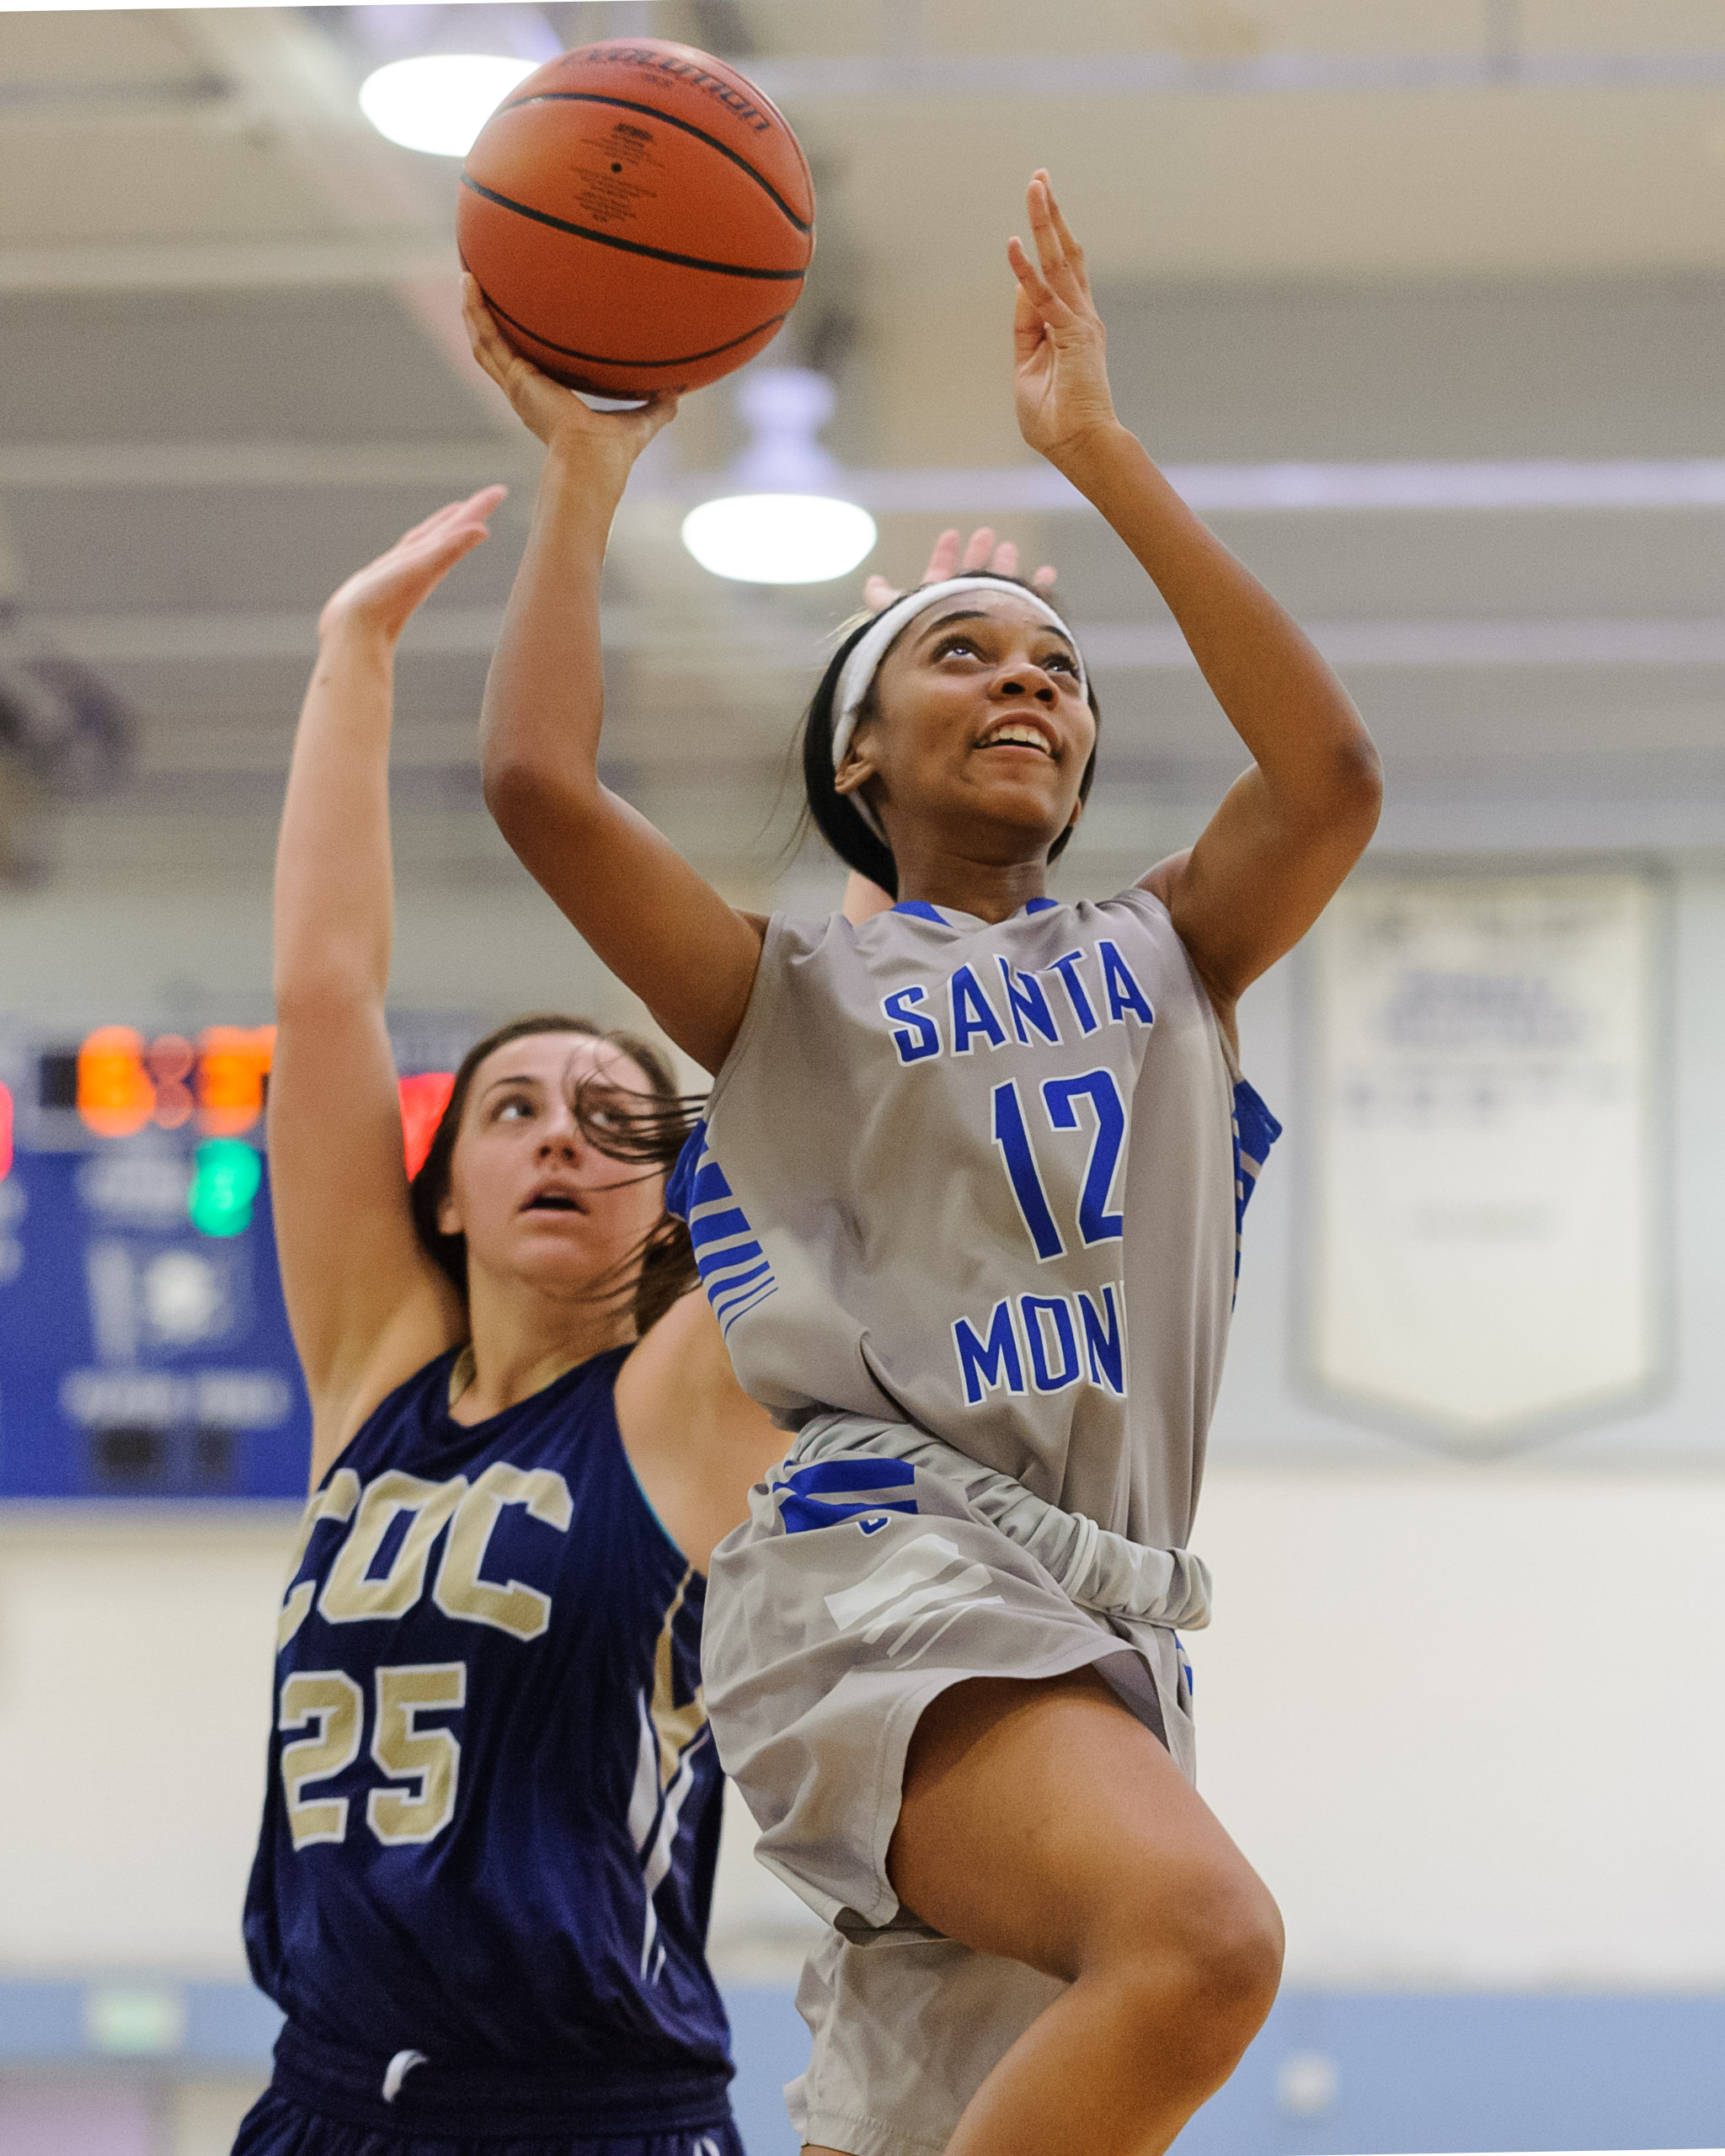  Forward Jazzmin Oddie (12,Right) of Santa Monica College passes Kalli Self (25,Left) of the College of the Canyons and soars towards the basket for a shot. The Santa Monica College Corsairs lose the game 108-70 to the College of the Canyons Cougars.